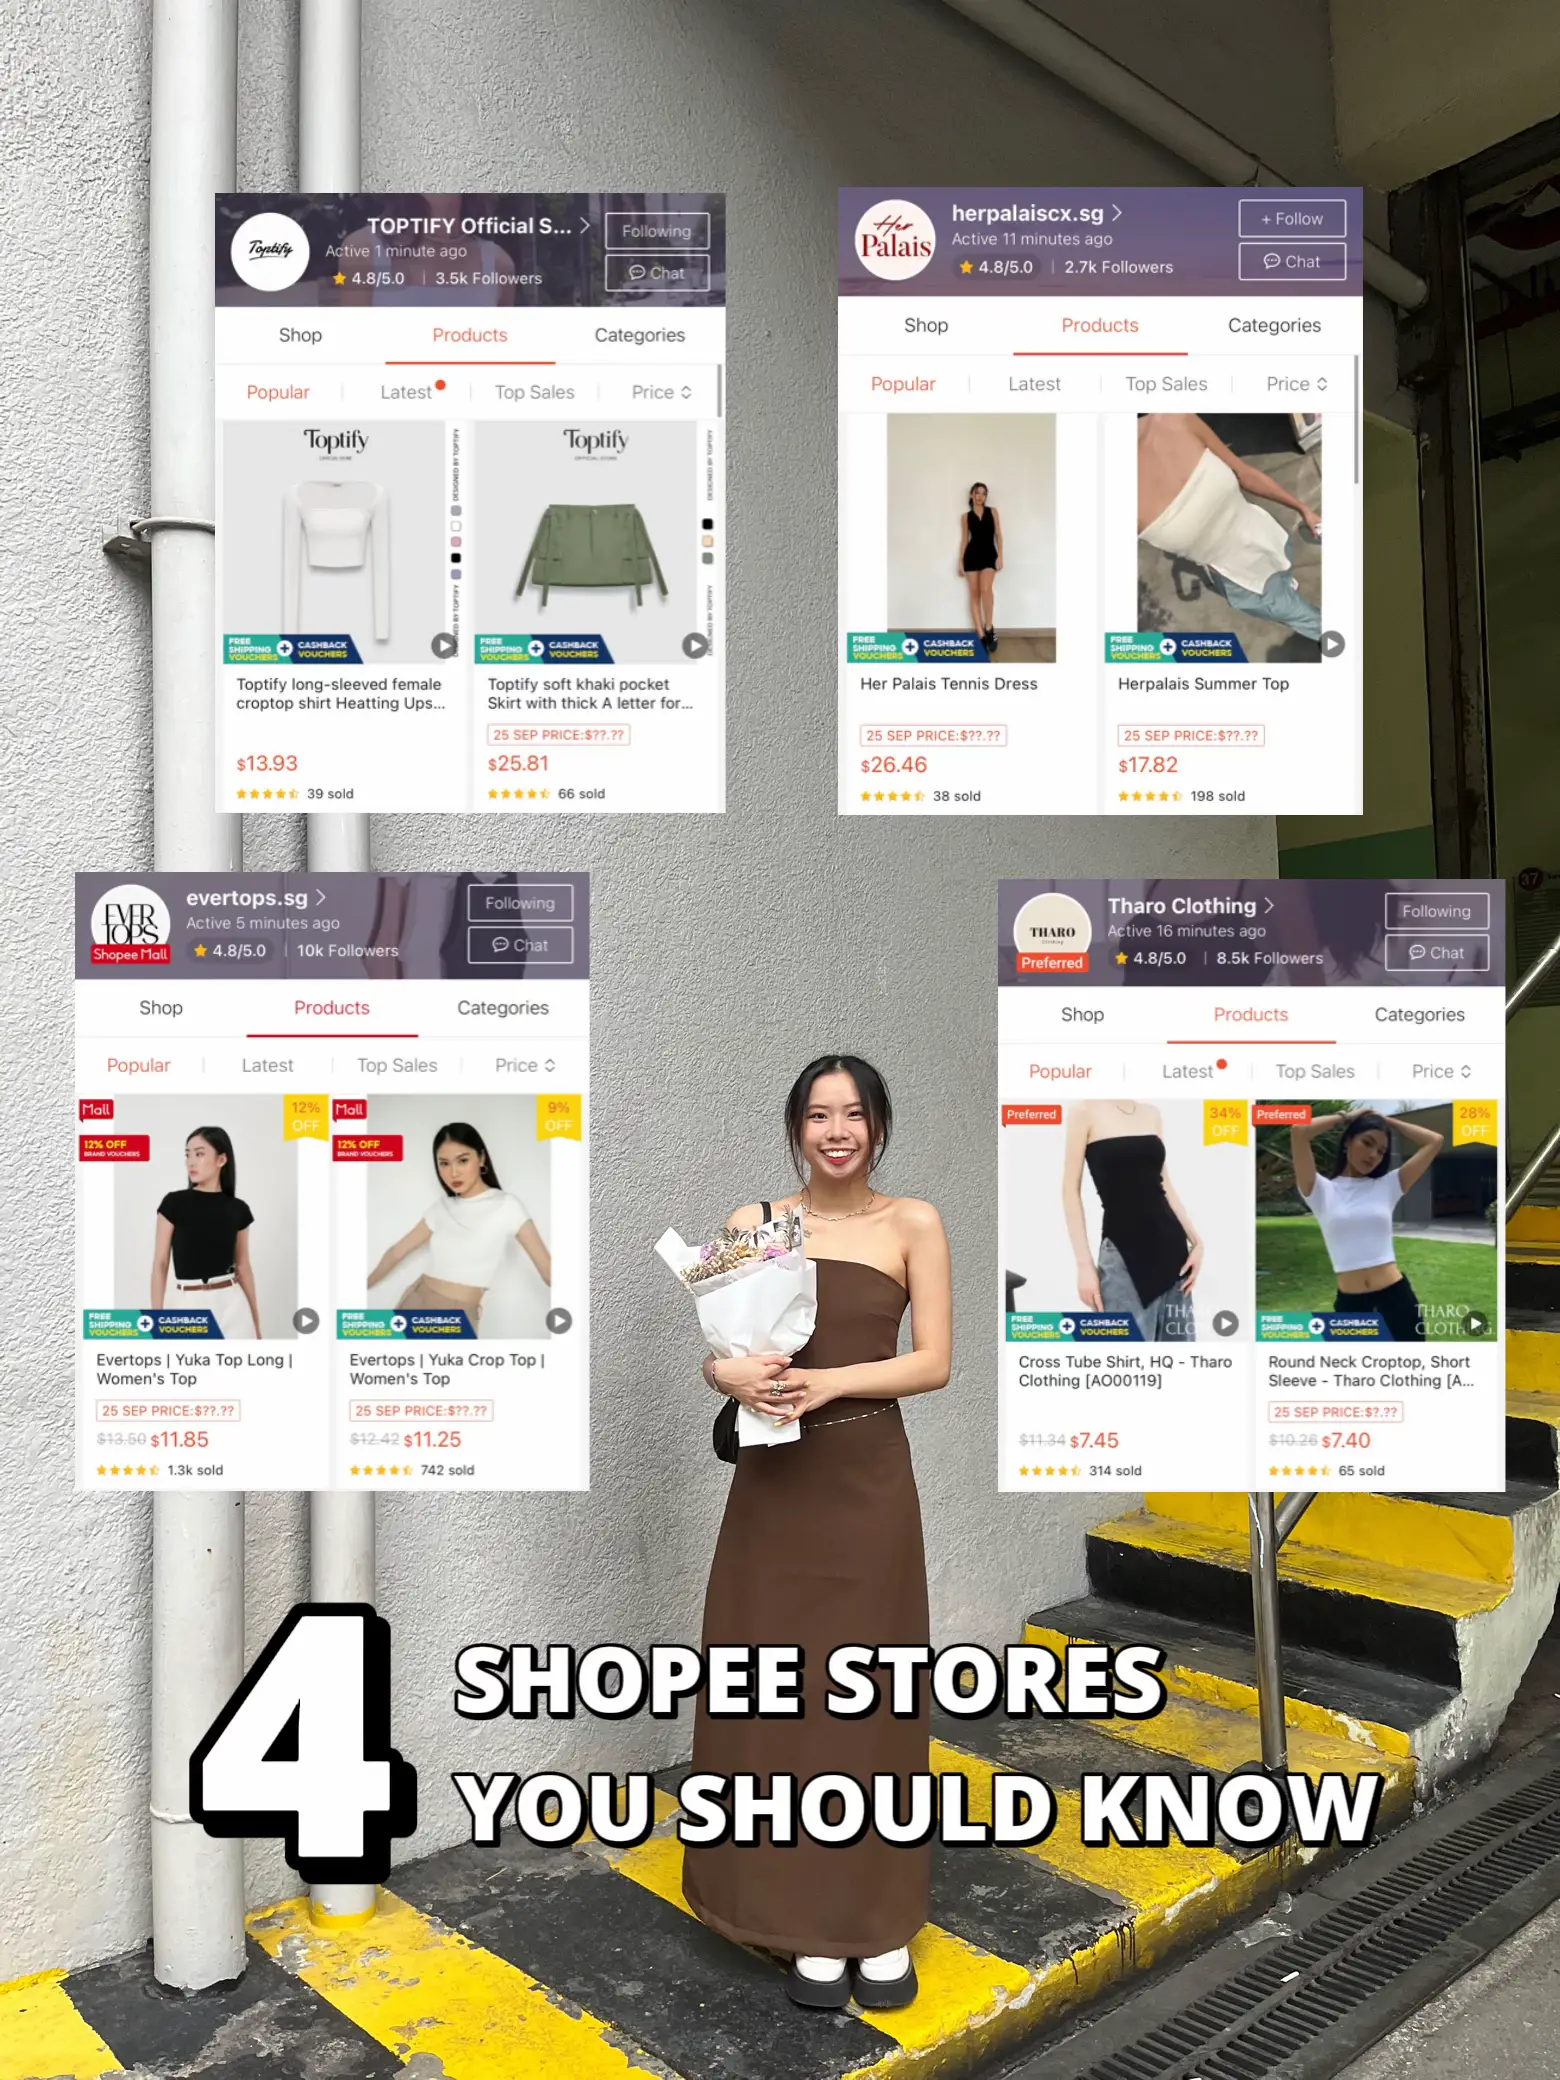 Shopee - Channel your inner KPop star with bestsellers on